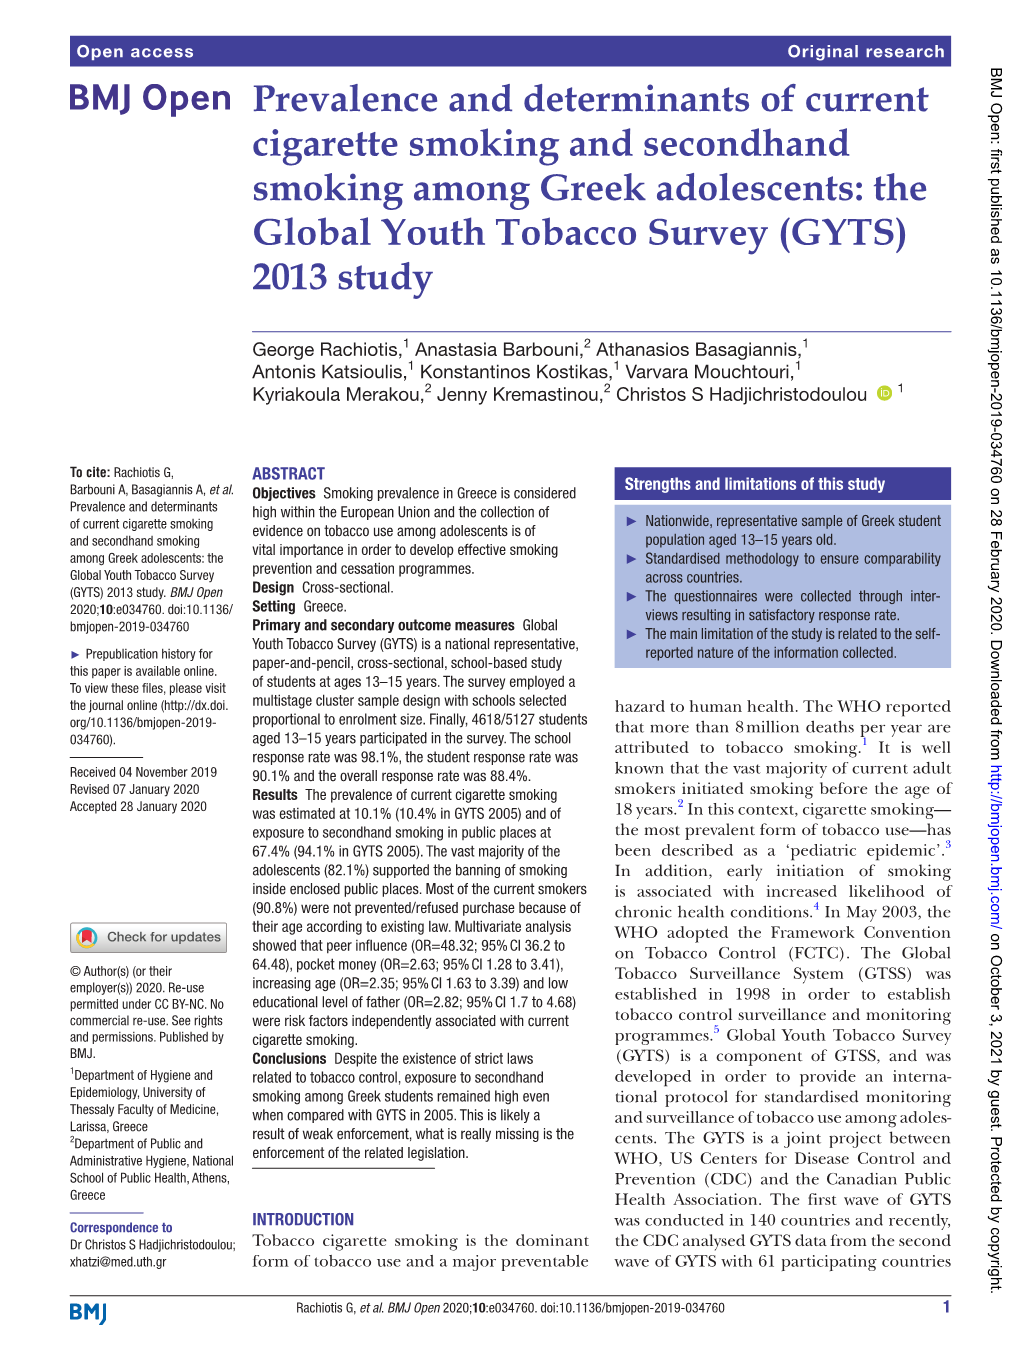 Prevalence and Determinants of Current Cigarette Smoking and Secondhand Smoking Among Greek Adolescents: the Global Youth Tobacco Survey (GYTS) 2013 Study